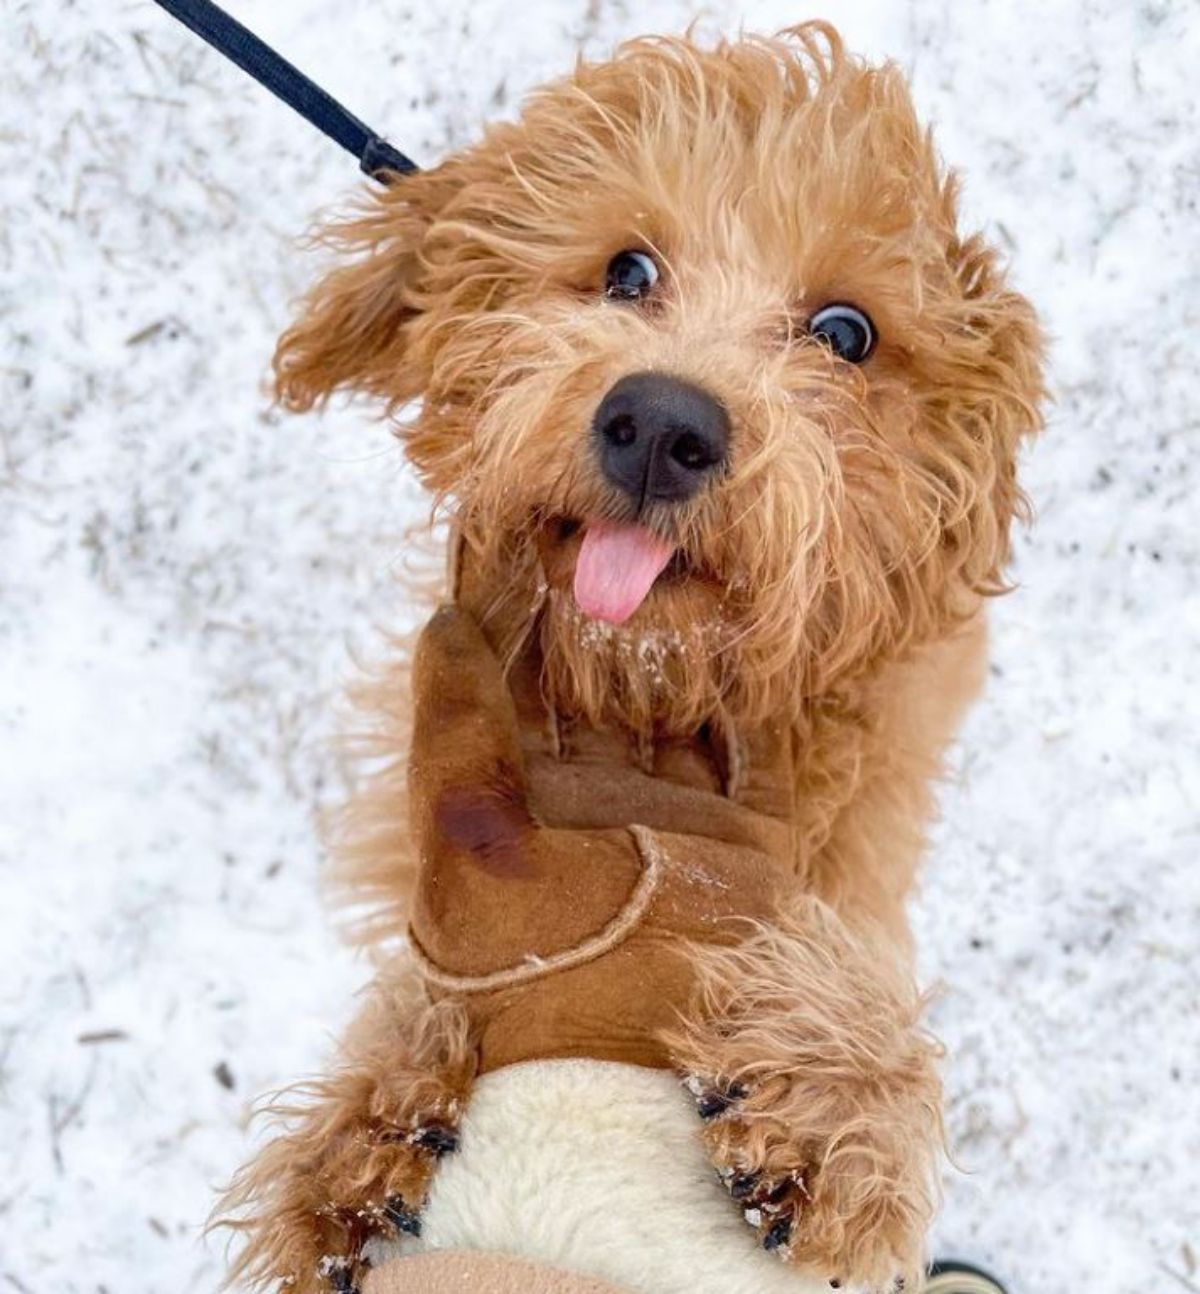 fluffy brown poodle standing in snow with the front paws holding someone's hand